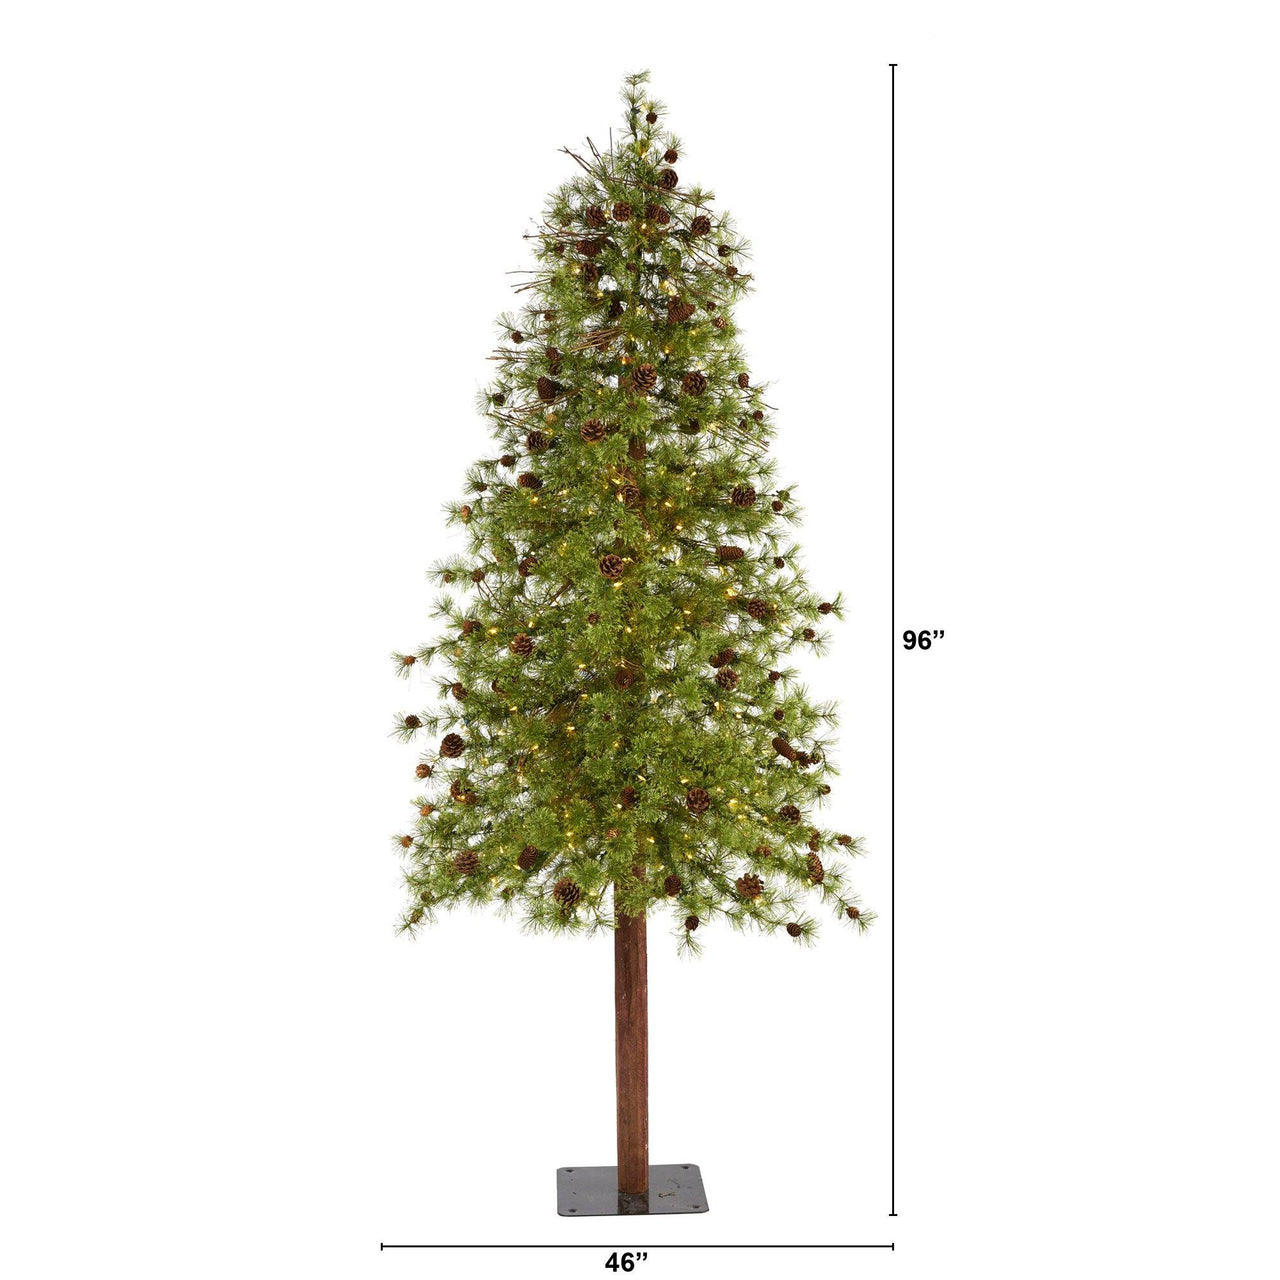 8' Wyoming Alpine Artificial Christmas Tree with 250 Clear (multifunction) LED Lights and Pine Cones on Natural Trunk - The Fox Decor